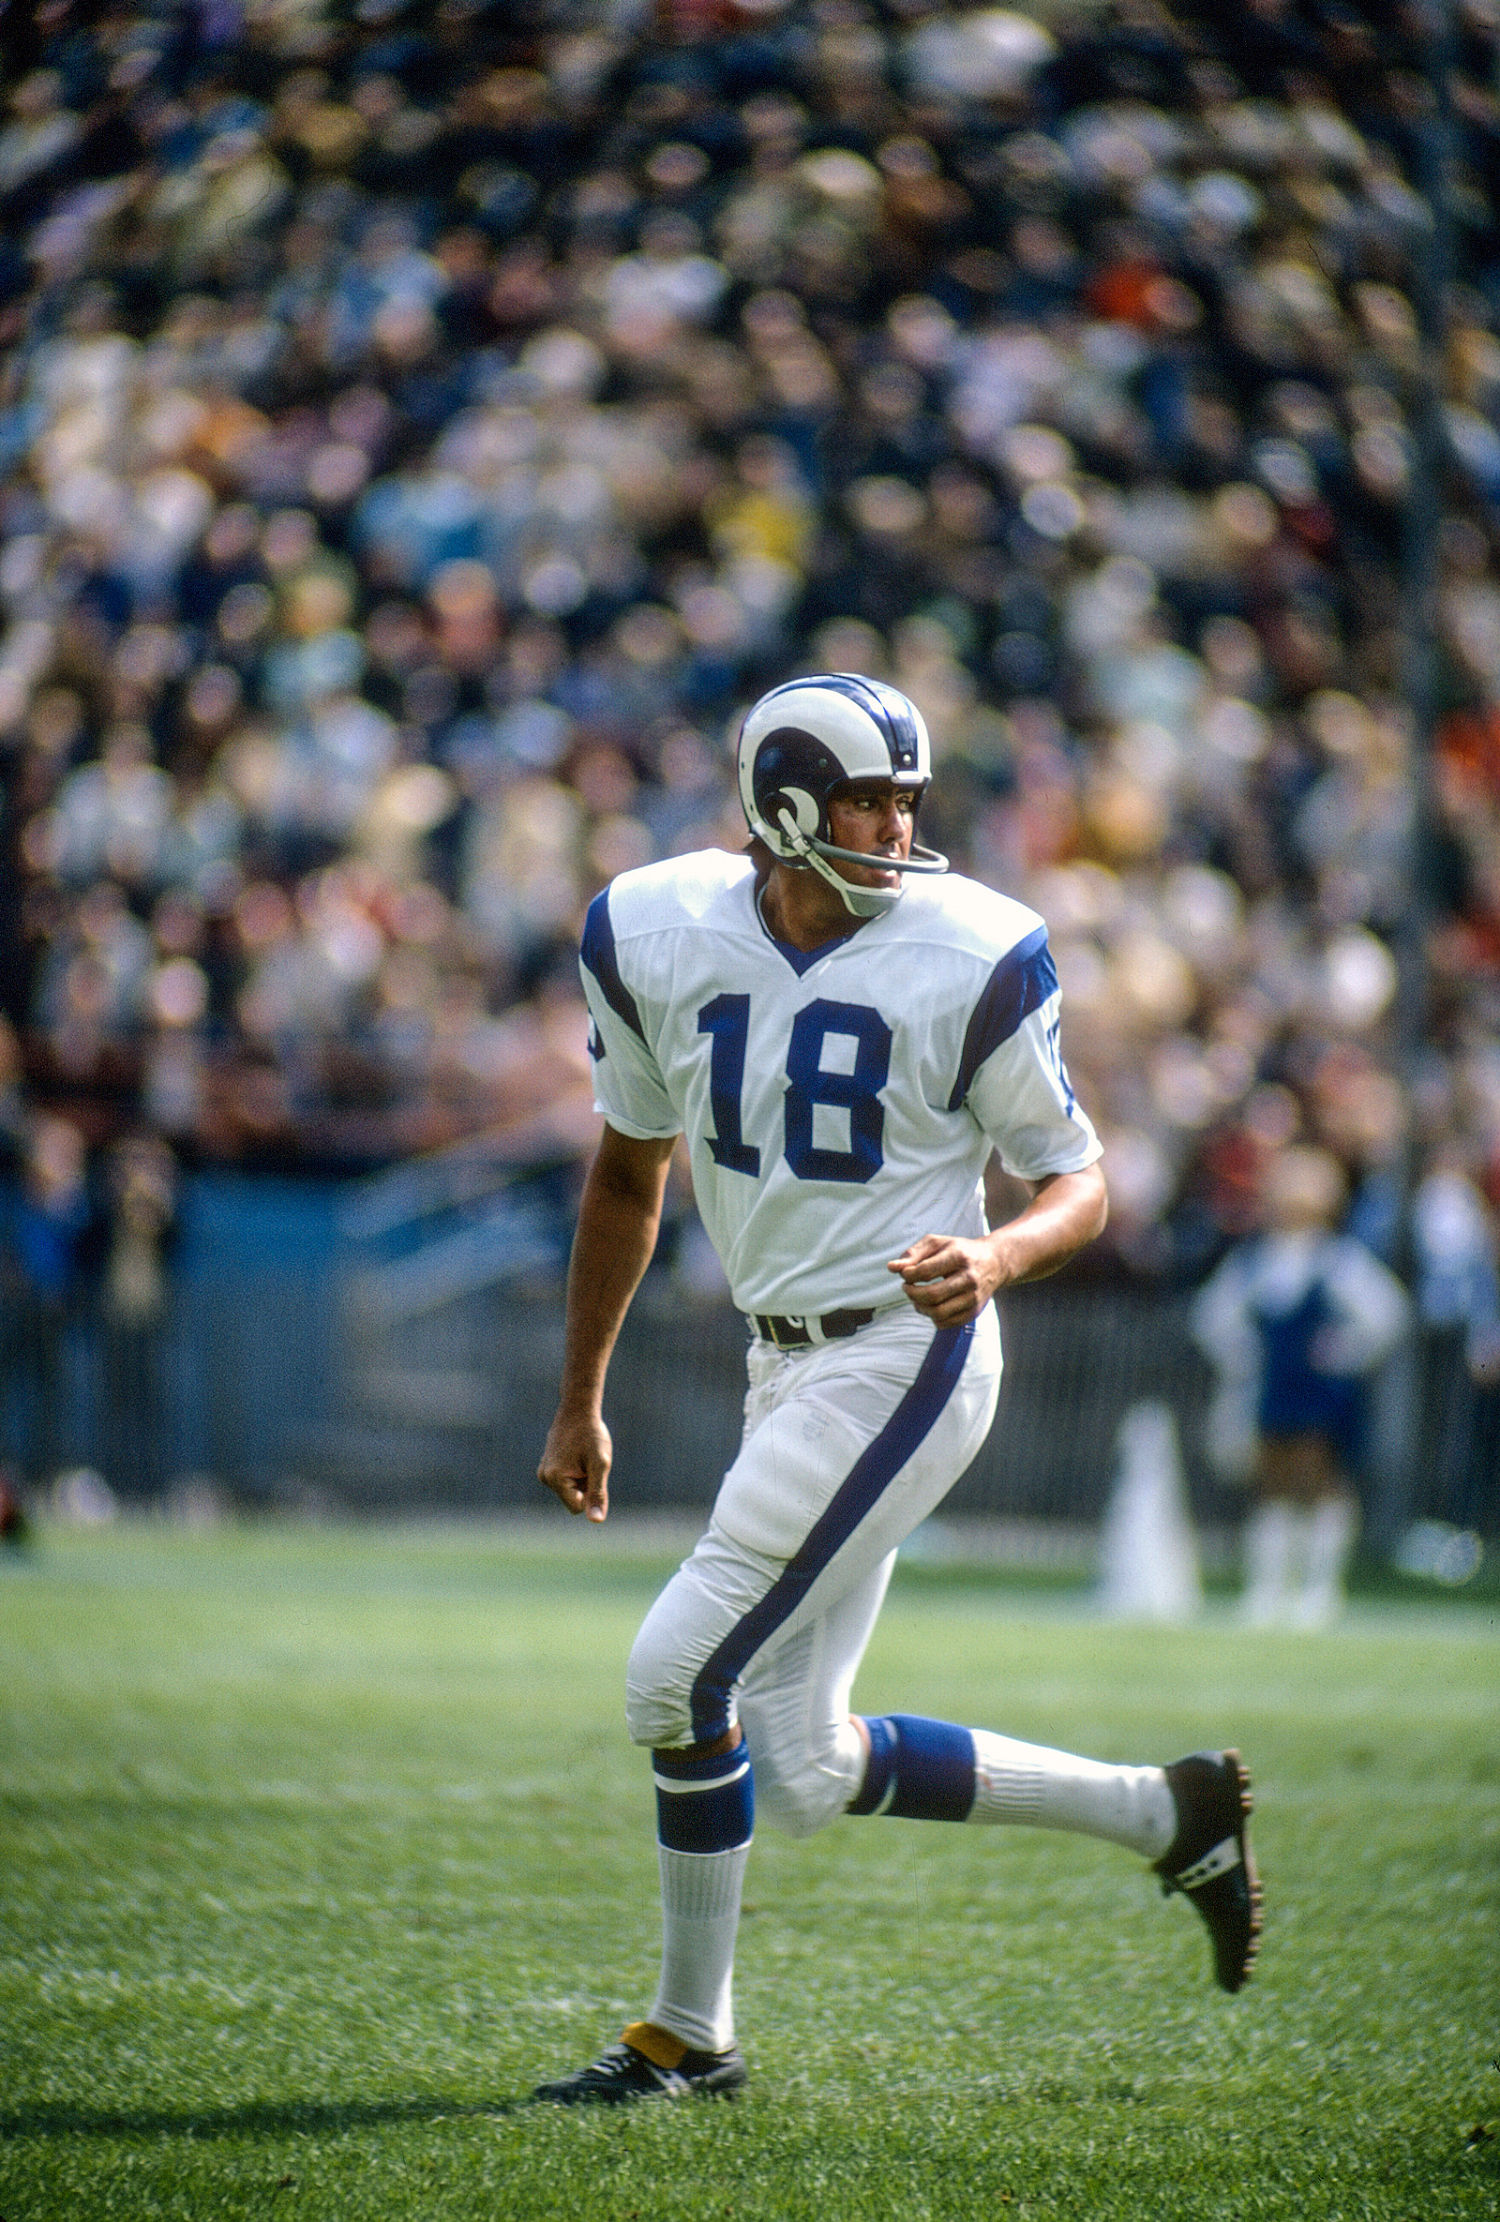 Roman Gabriel dies at 83. The first Filipino American quarterback in the NFL was MVP in 1969